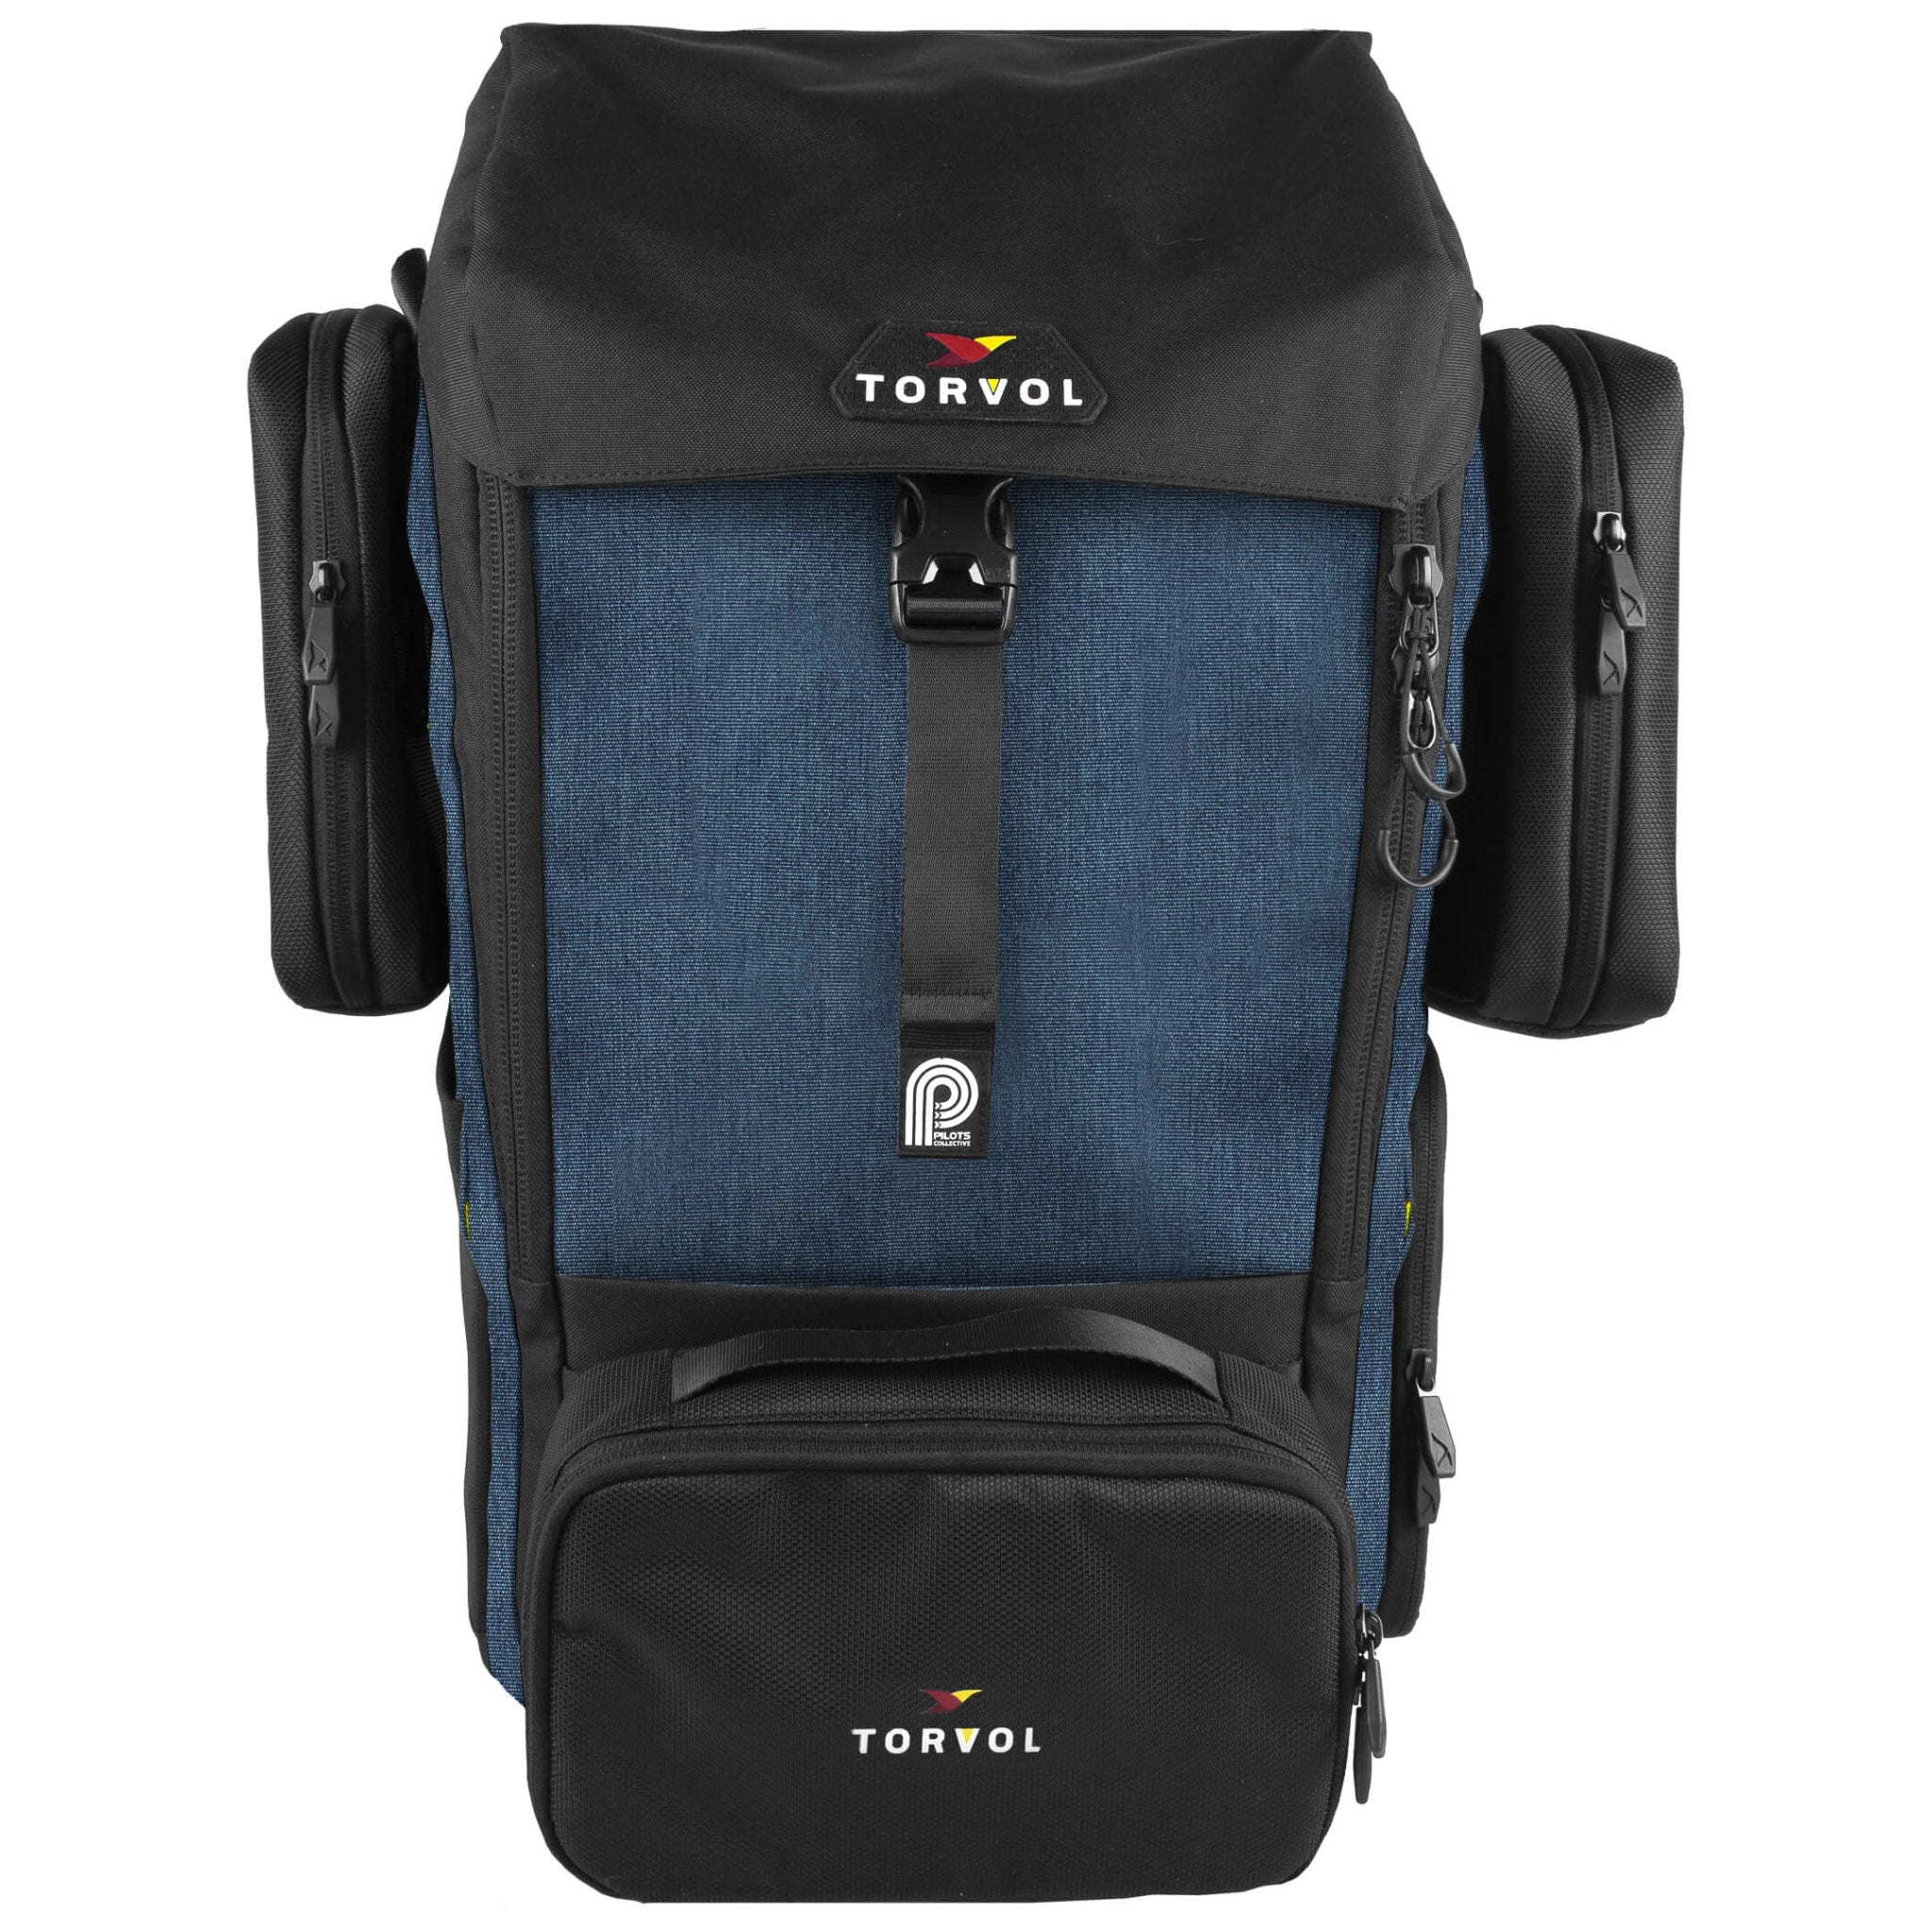 Torvol Urban Carrier Backpack - Your All-Round Freestyle Backpack 15 - Torvol - Drone Authority